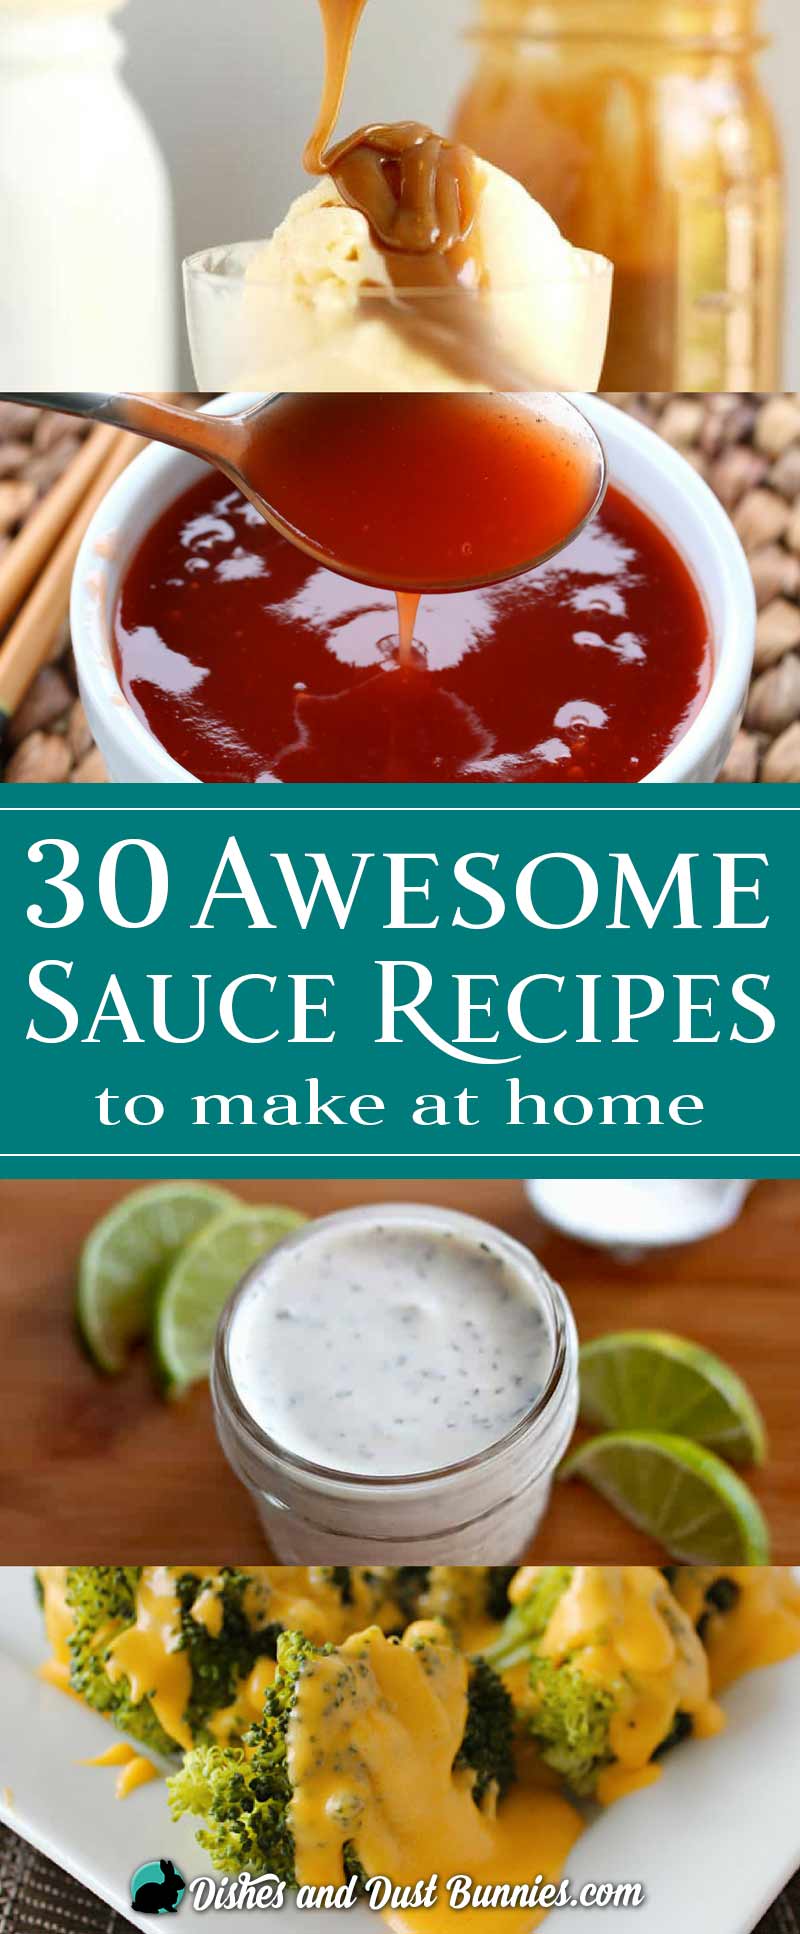 30 Awesome Sauce Recipes to Make at Home from dishesanddustbunnies.com